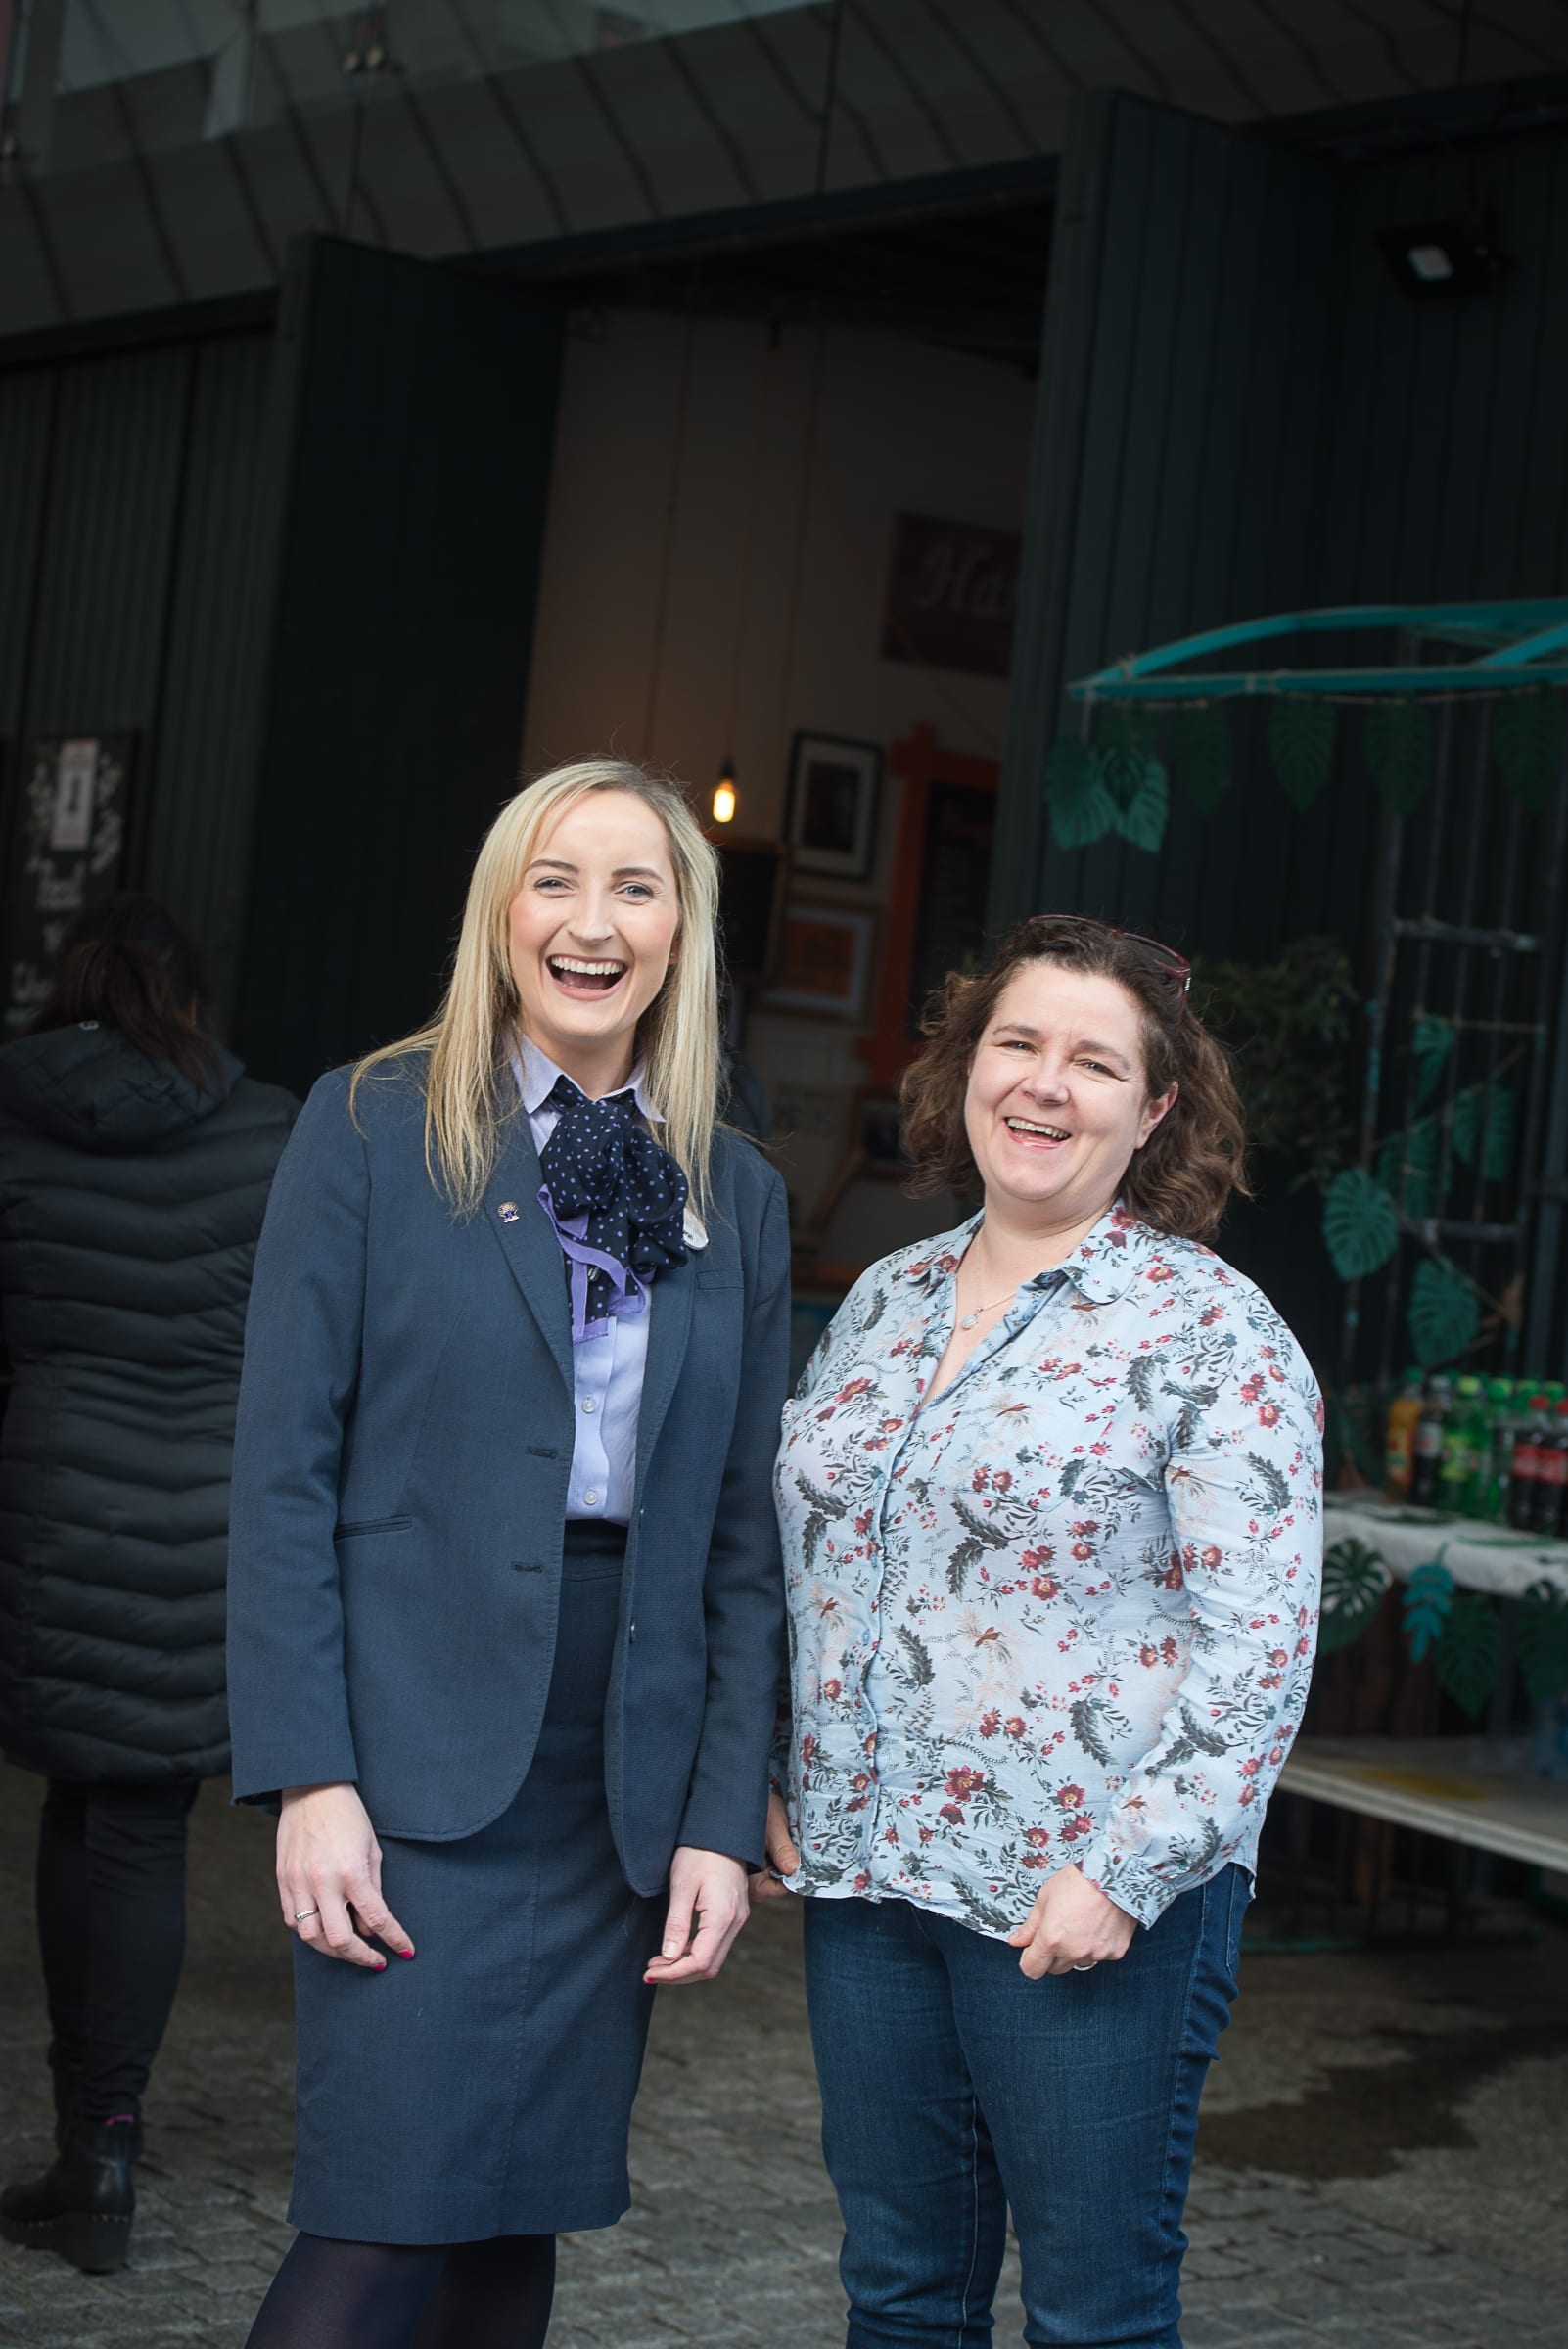 From Left to Right:  Regional Leaders BBQ which took place on the 6th June in the Limerick Milk Market: Sarah Barry  - Limerick and  District Credit Union, Sandra Joyce- Irish World Academy of Music and Dance
Photo by Morning Star Photography